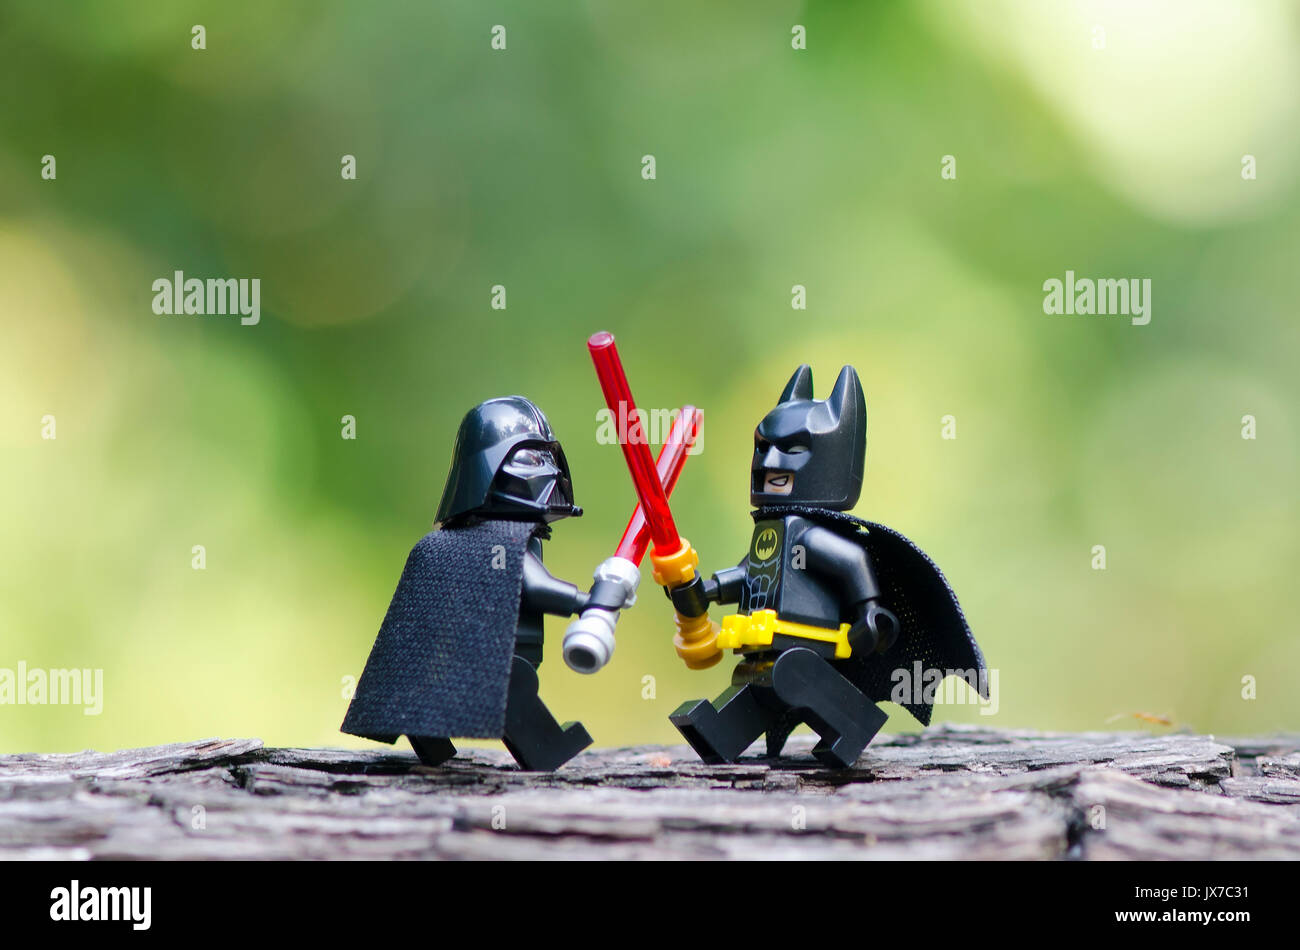 lego darth vader and batman fighting with light saber Stock Photo - Alamy